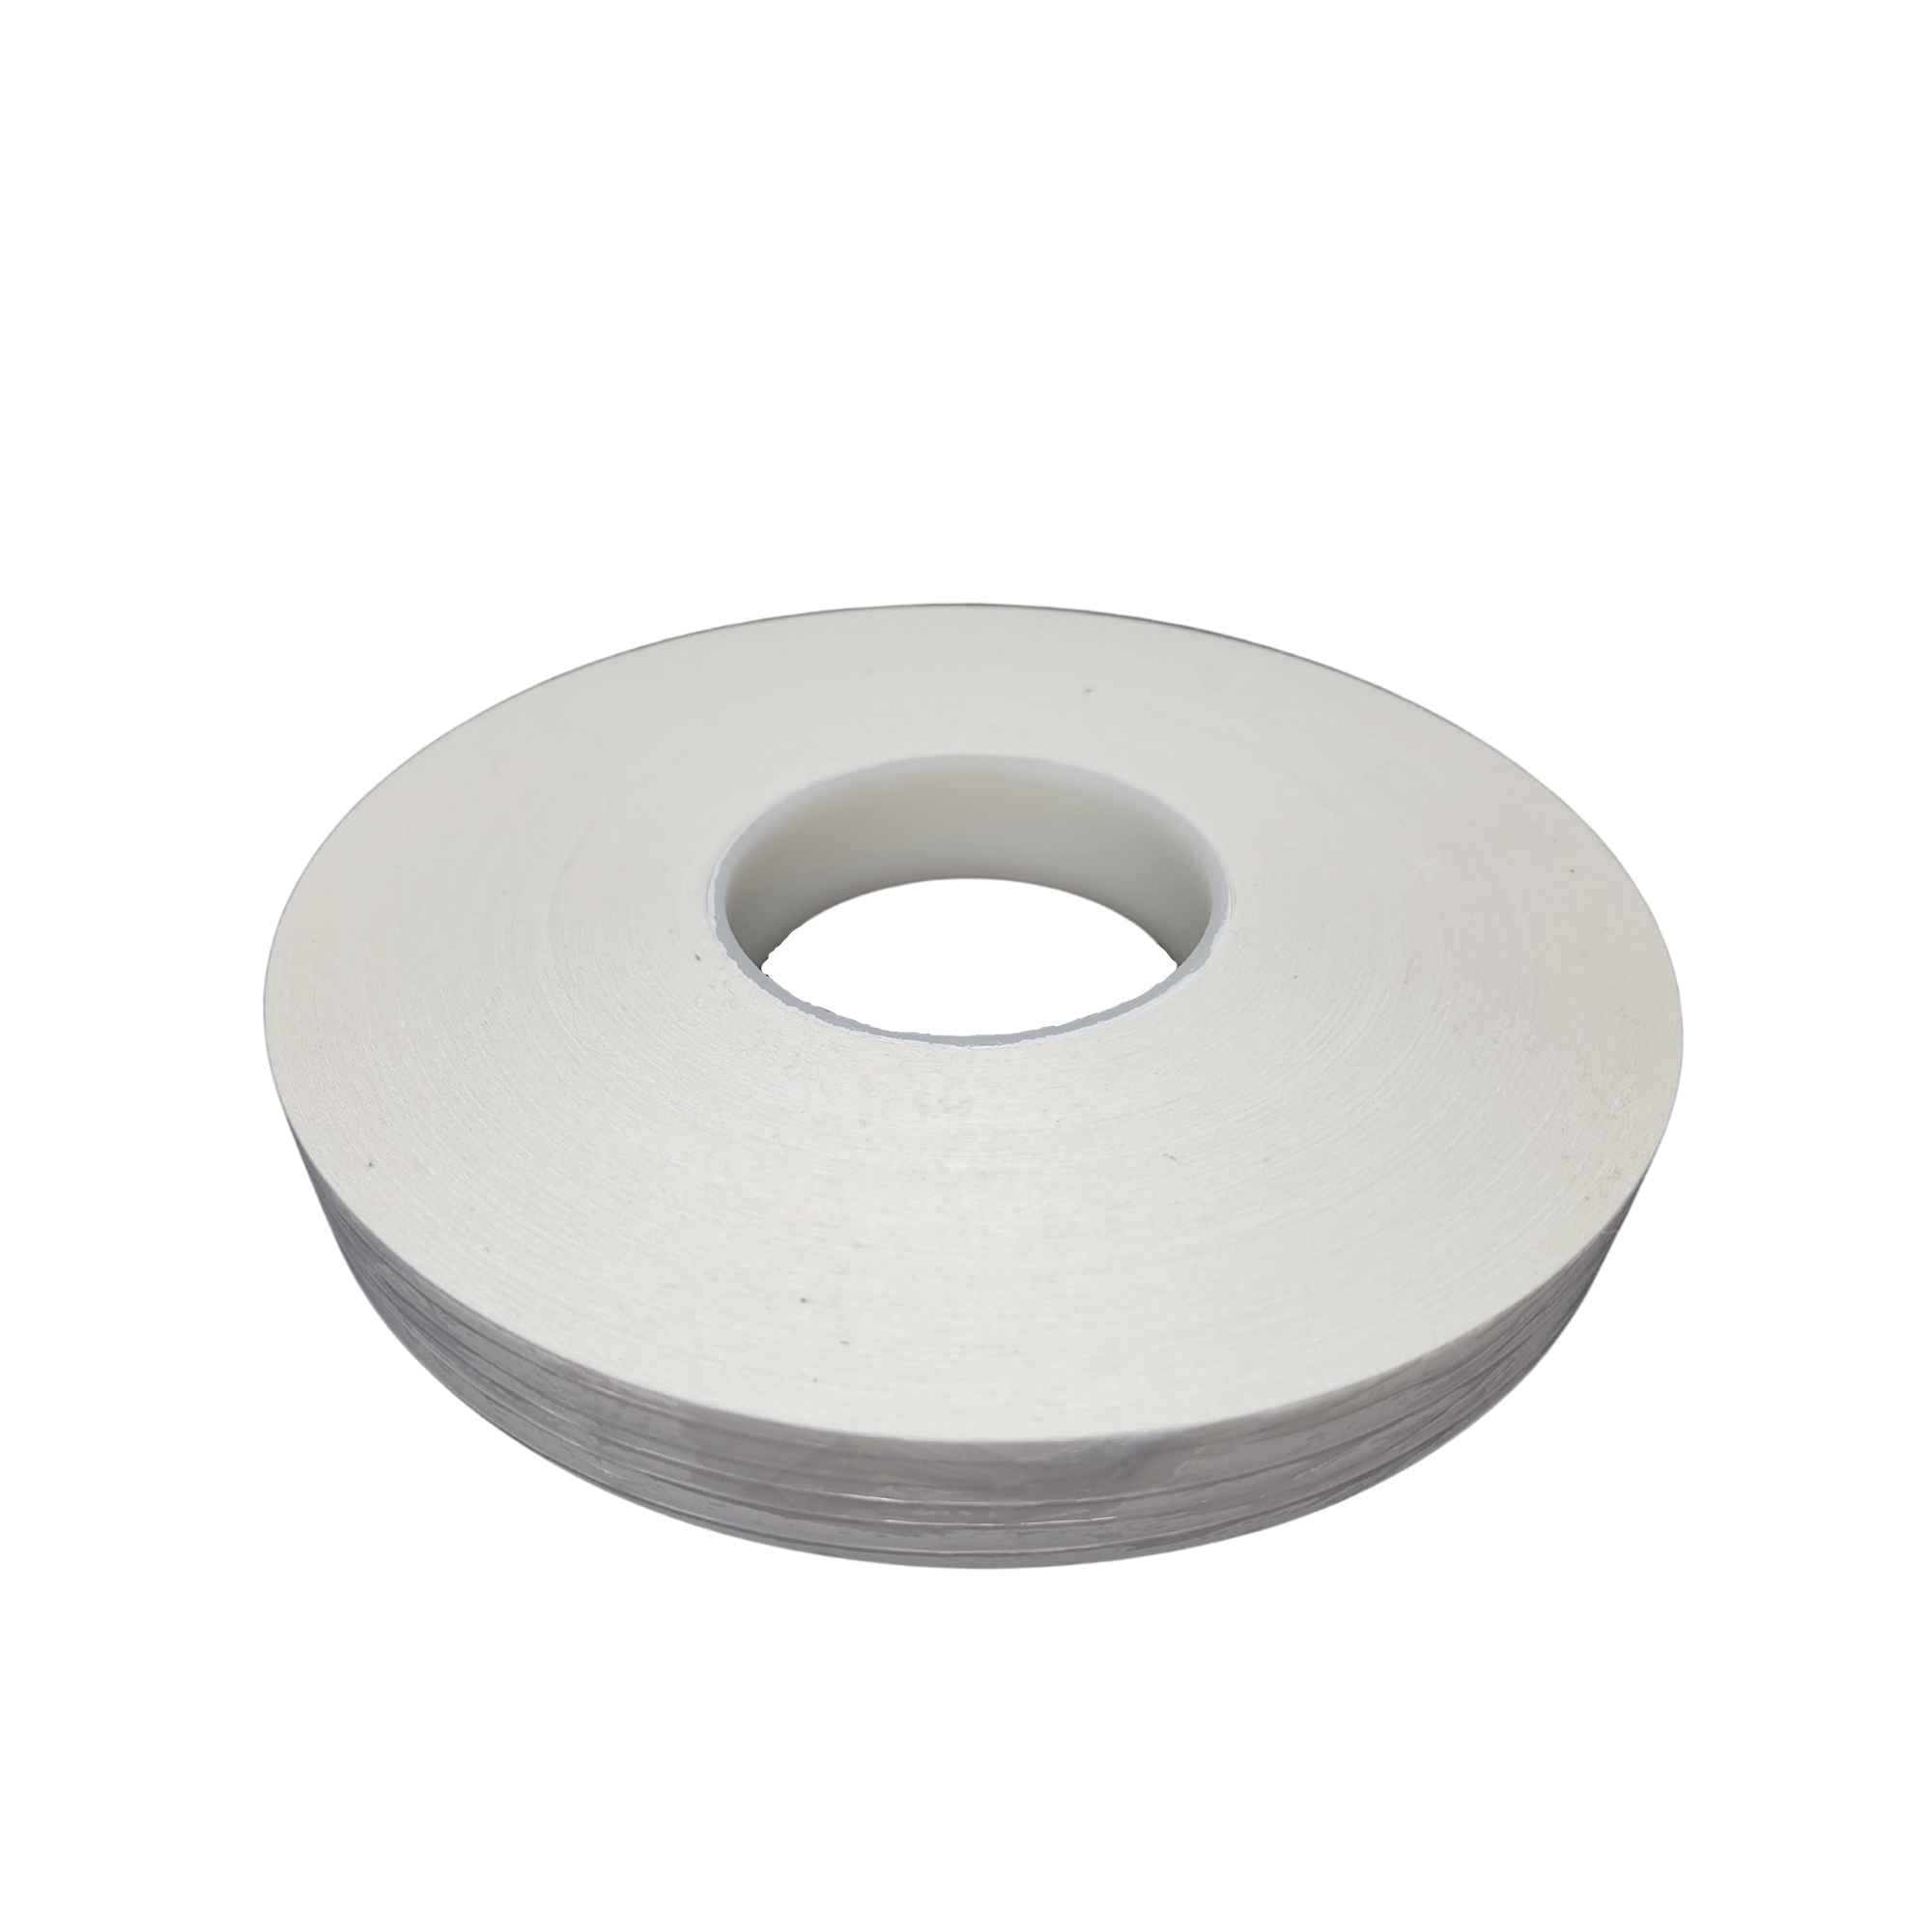 Flash Tape mini adhesive clothing tape comes with compact dispenser